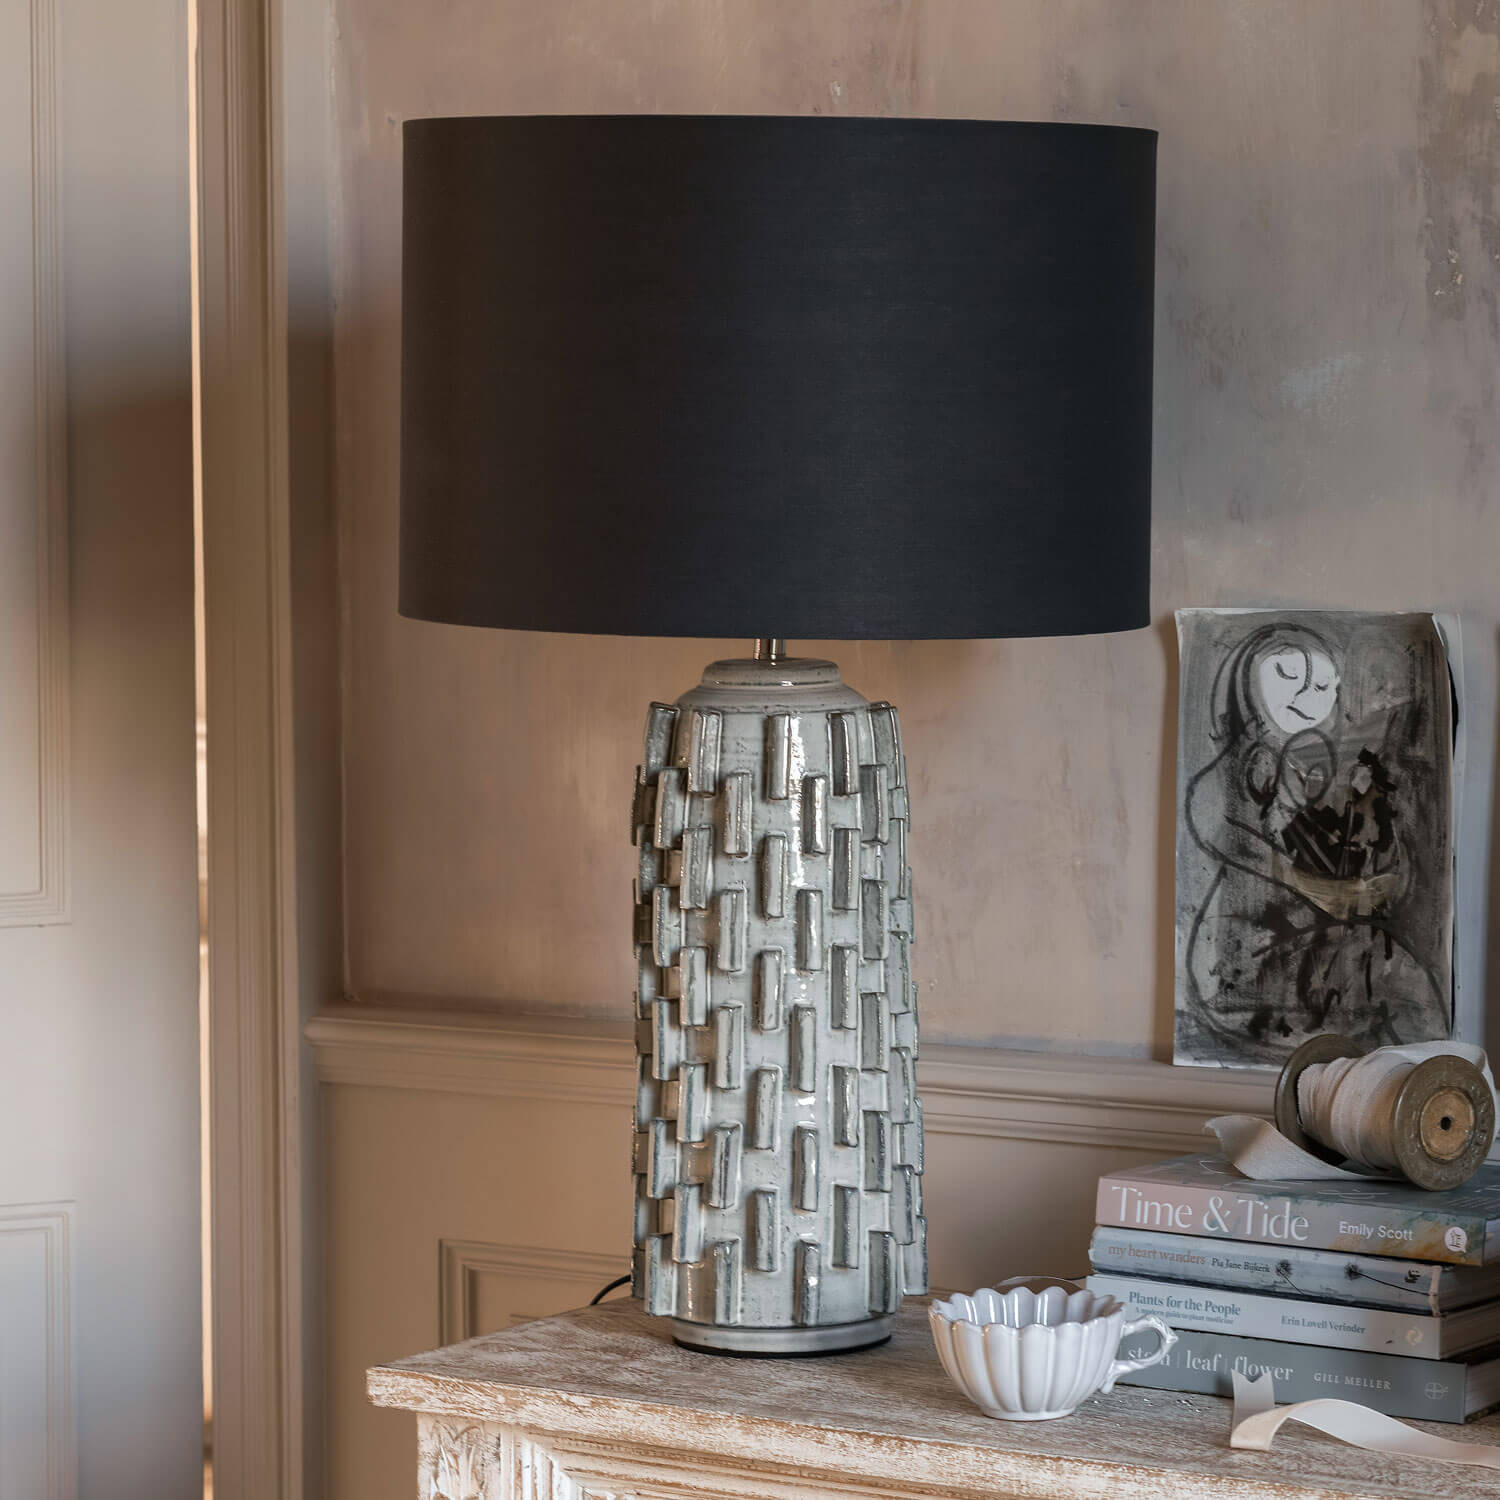 Grey Ceramic Table Lamp with Shade - image 1